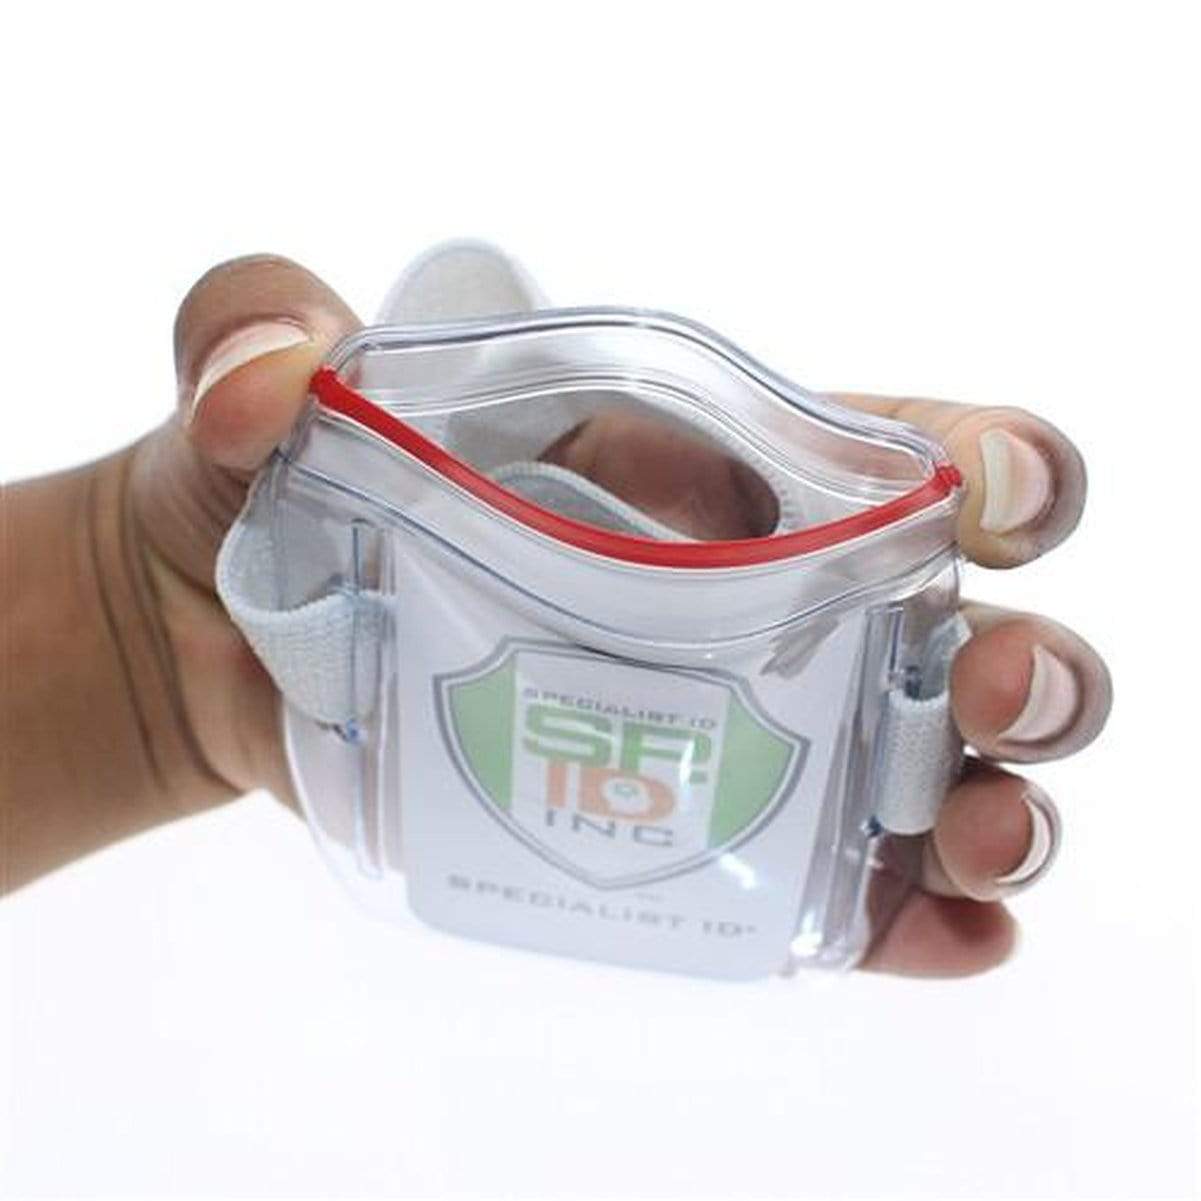 Vertical Armband ID Badge Holders with Zipper Top (504-ARZB & 504-ARZW)